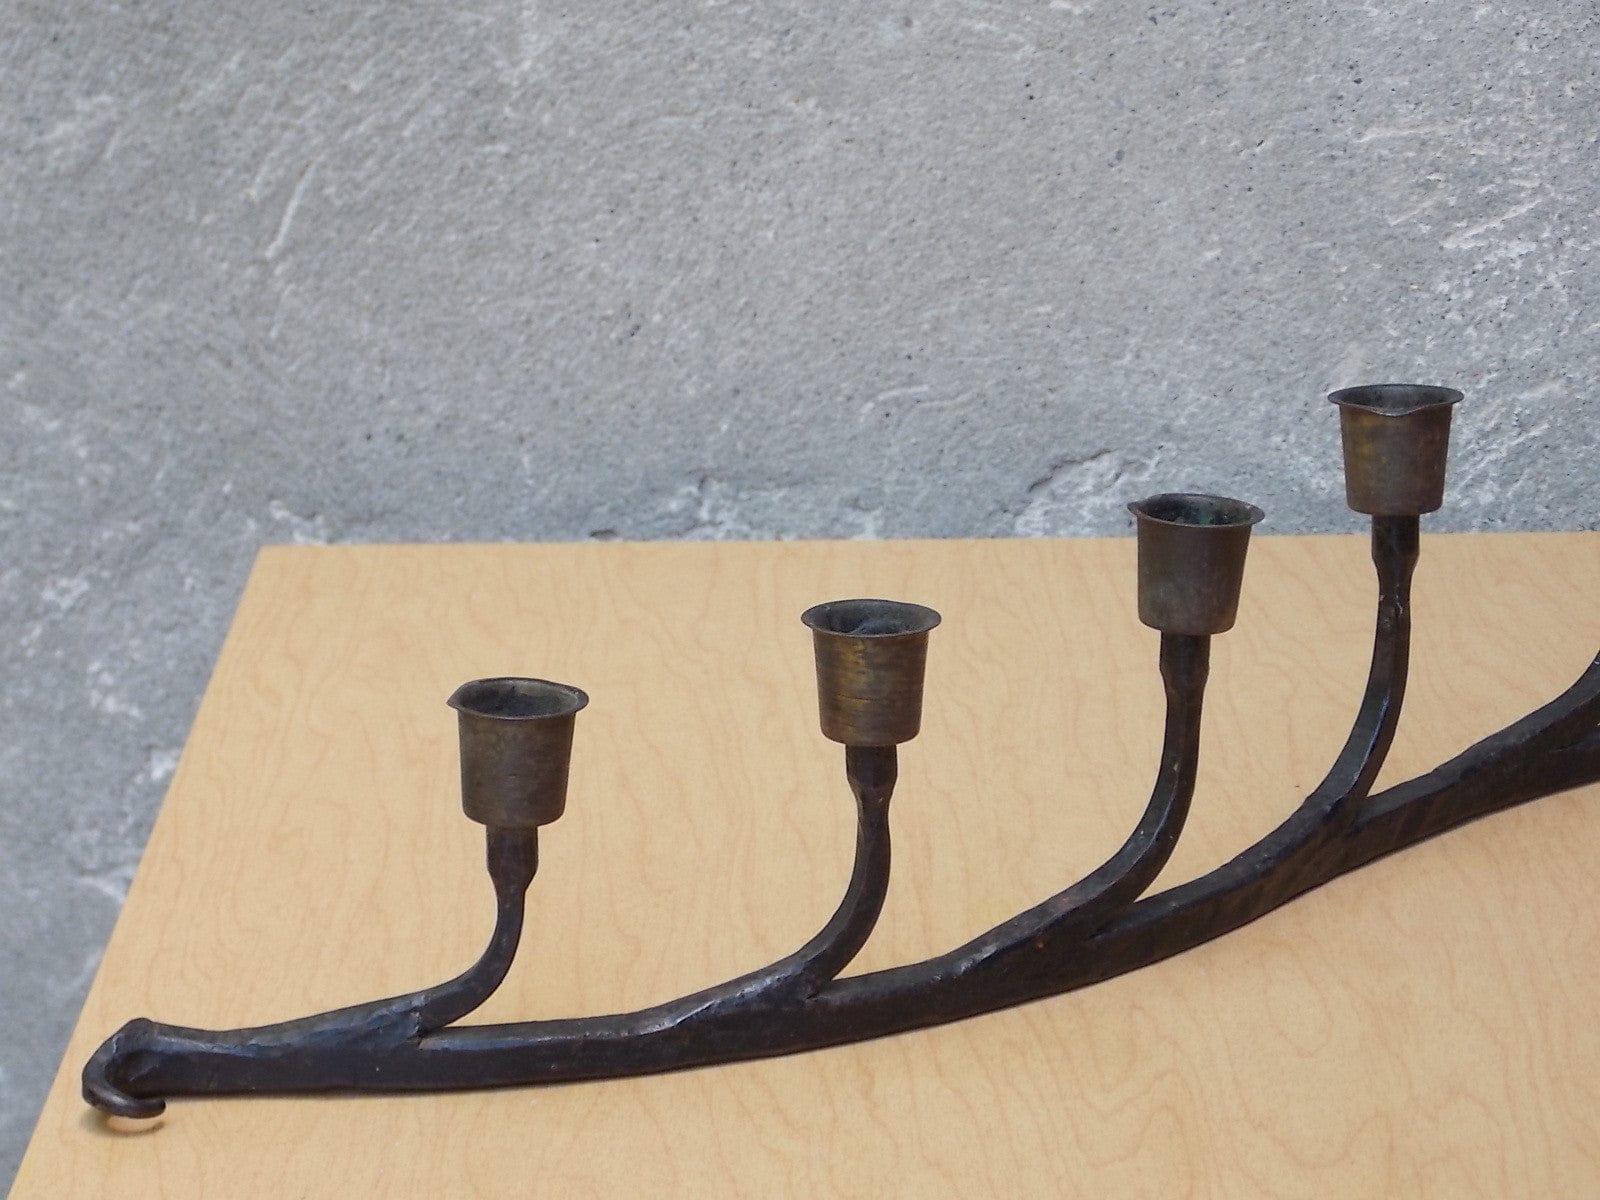 I Like Mike's Mid-Century Modern Accessories Black Hand Forged Wrought Iron 7 Candle Holder - Rustic Centerpiece